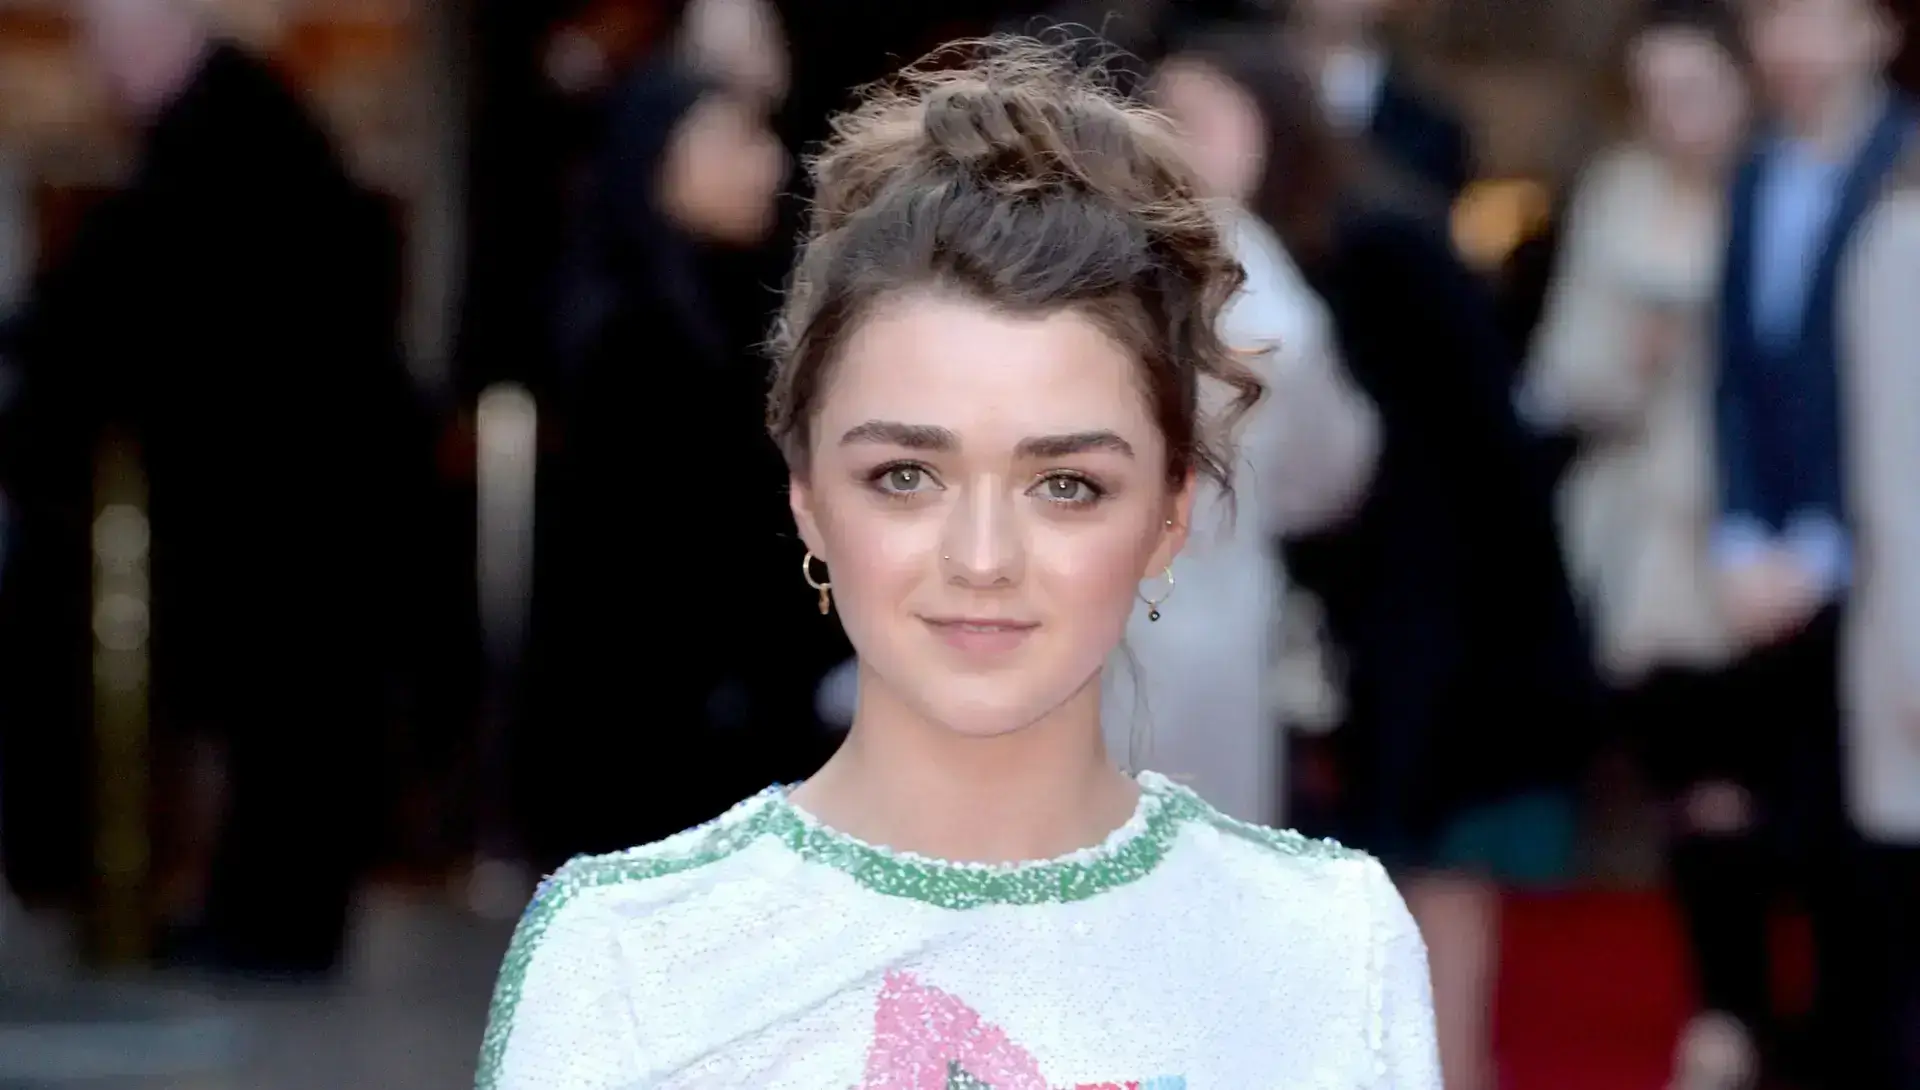 Maisie Williams: Balancing Fame, Privacy, and Social Media